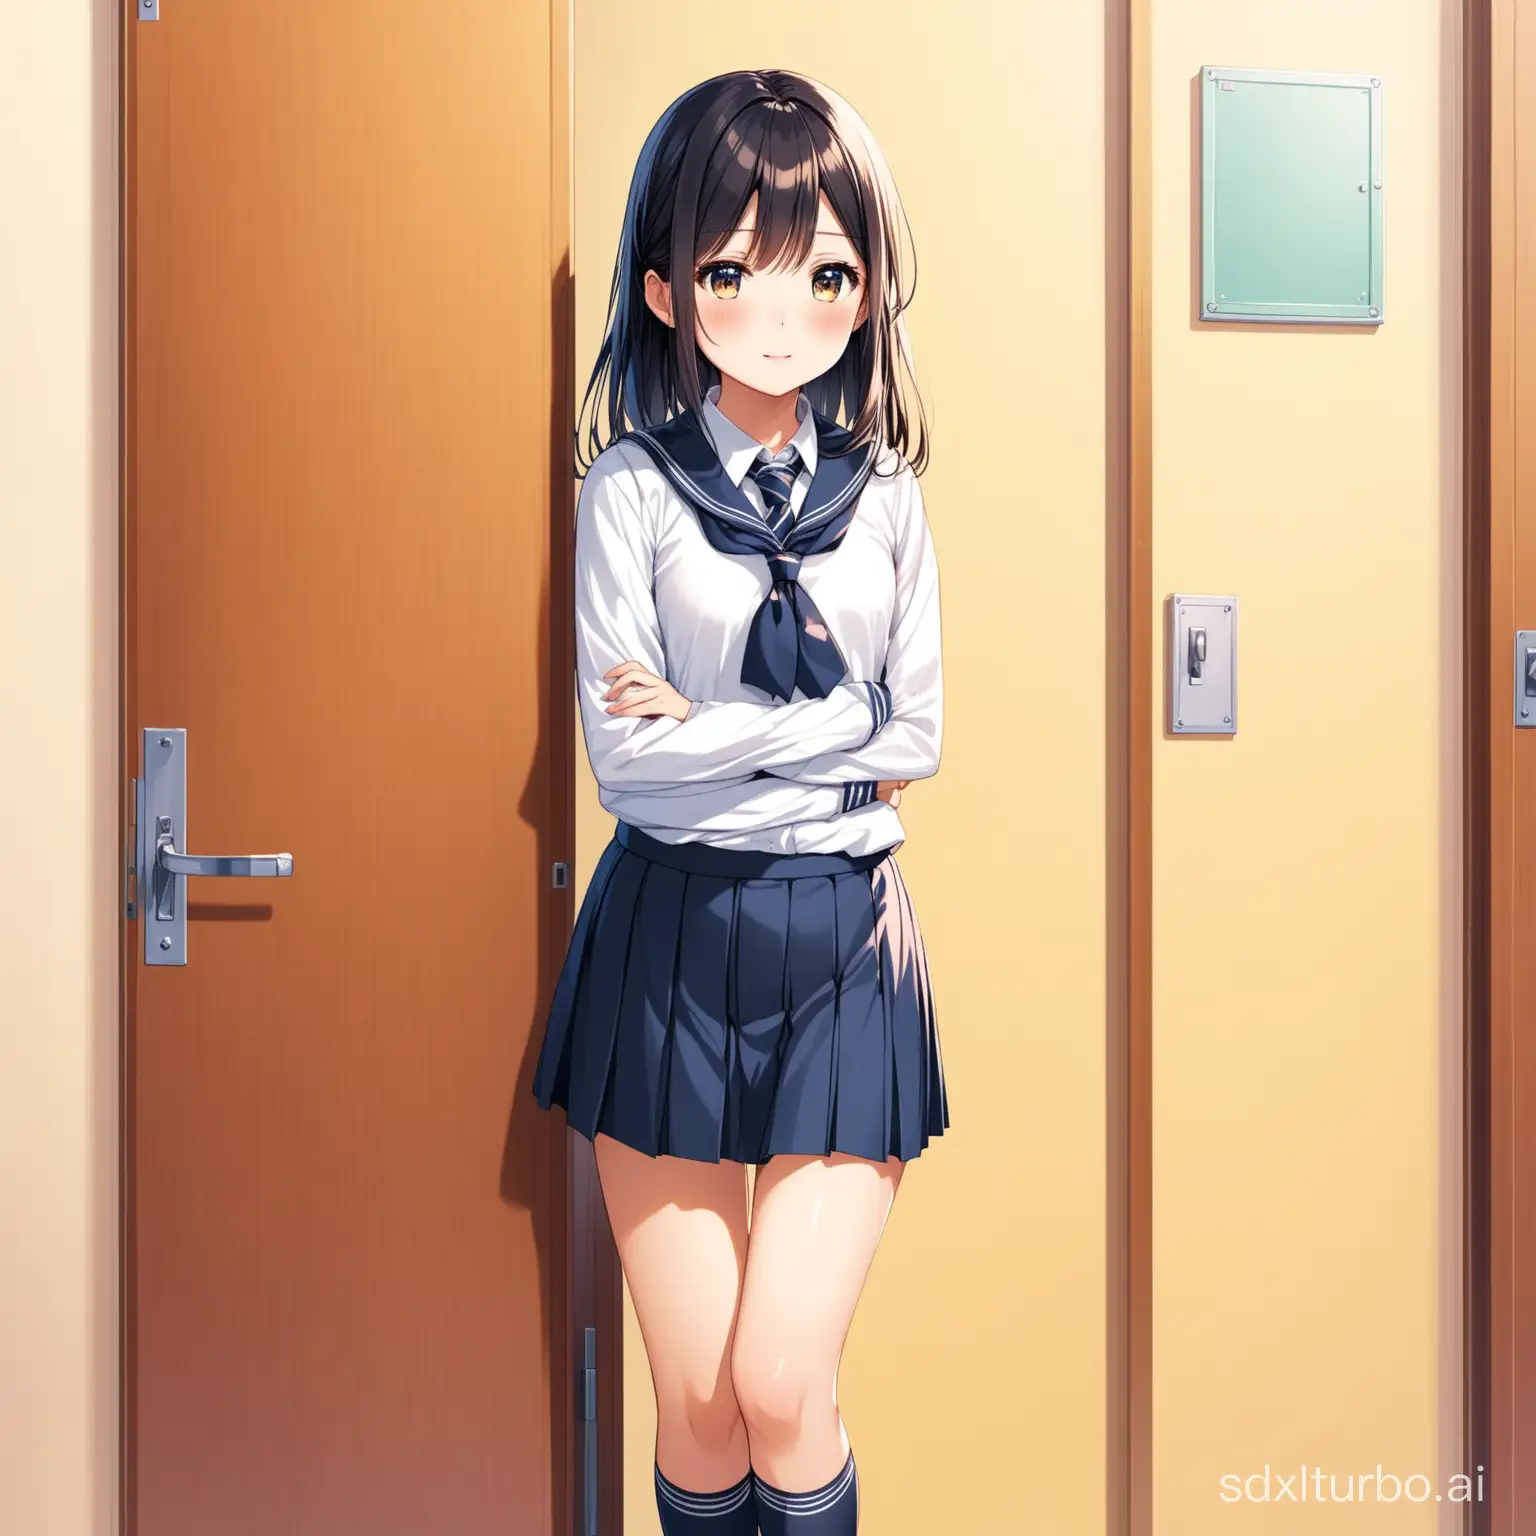 A beautiful and charming girl, wearing a school uniform, leaning against the classroom door, spacing out